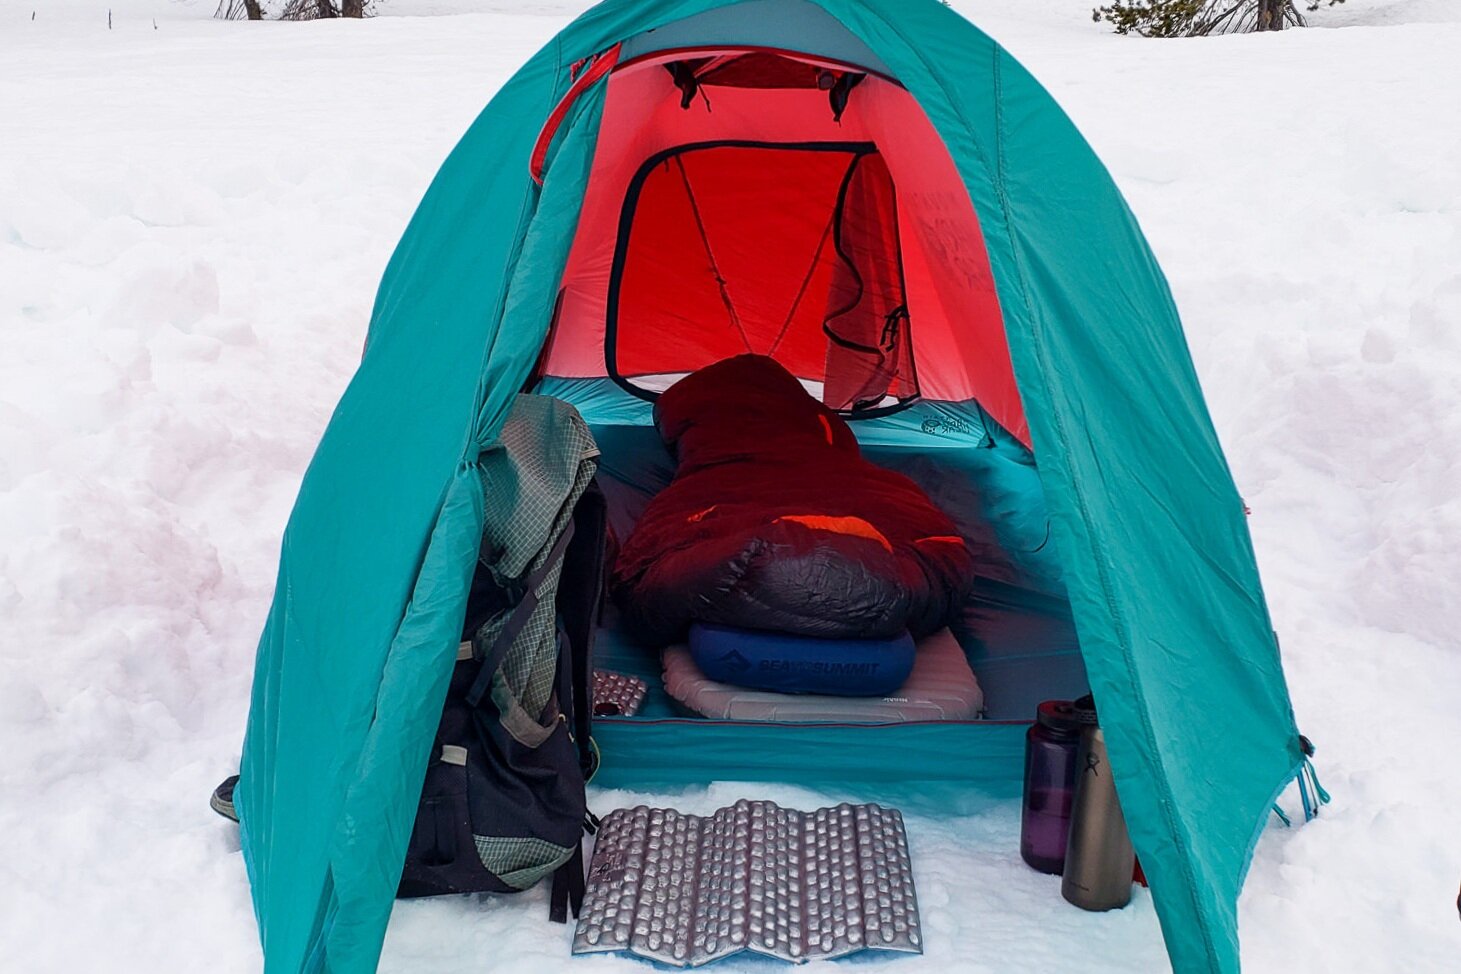 The Mountain Hardwear Outpost 2 has ample headroom, a great vent system & a large front vestibule to keep gear out of the snow.